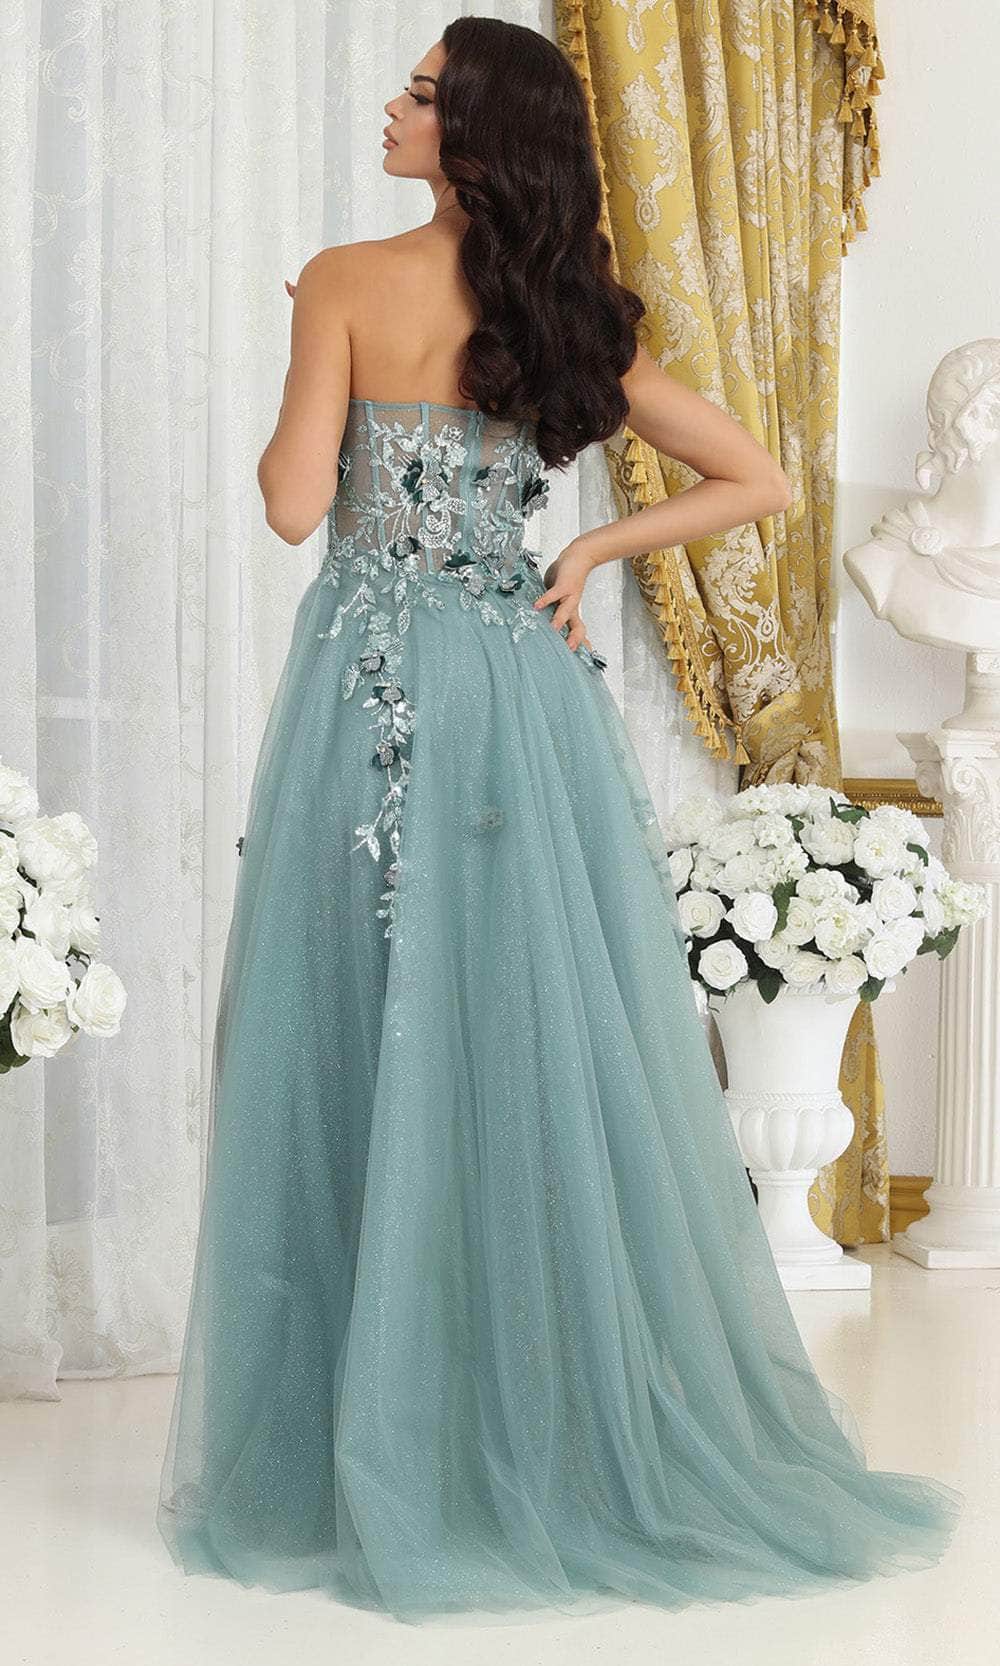 May Queen MQ2059 - Strapless Bustier Evening Dress Prom Dresses